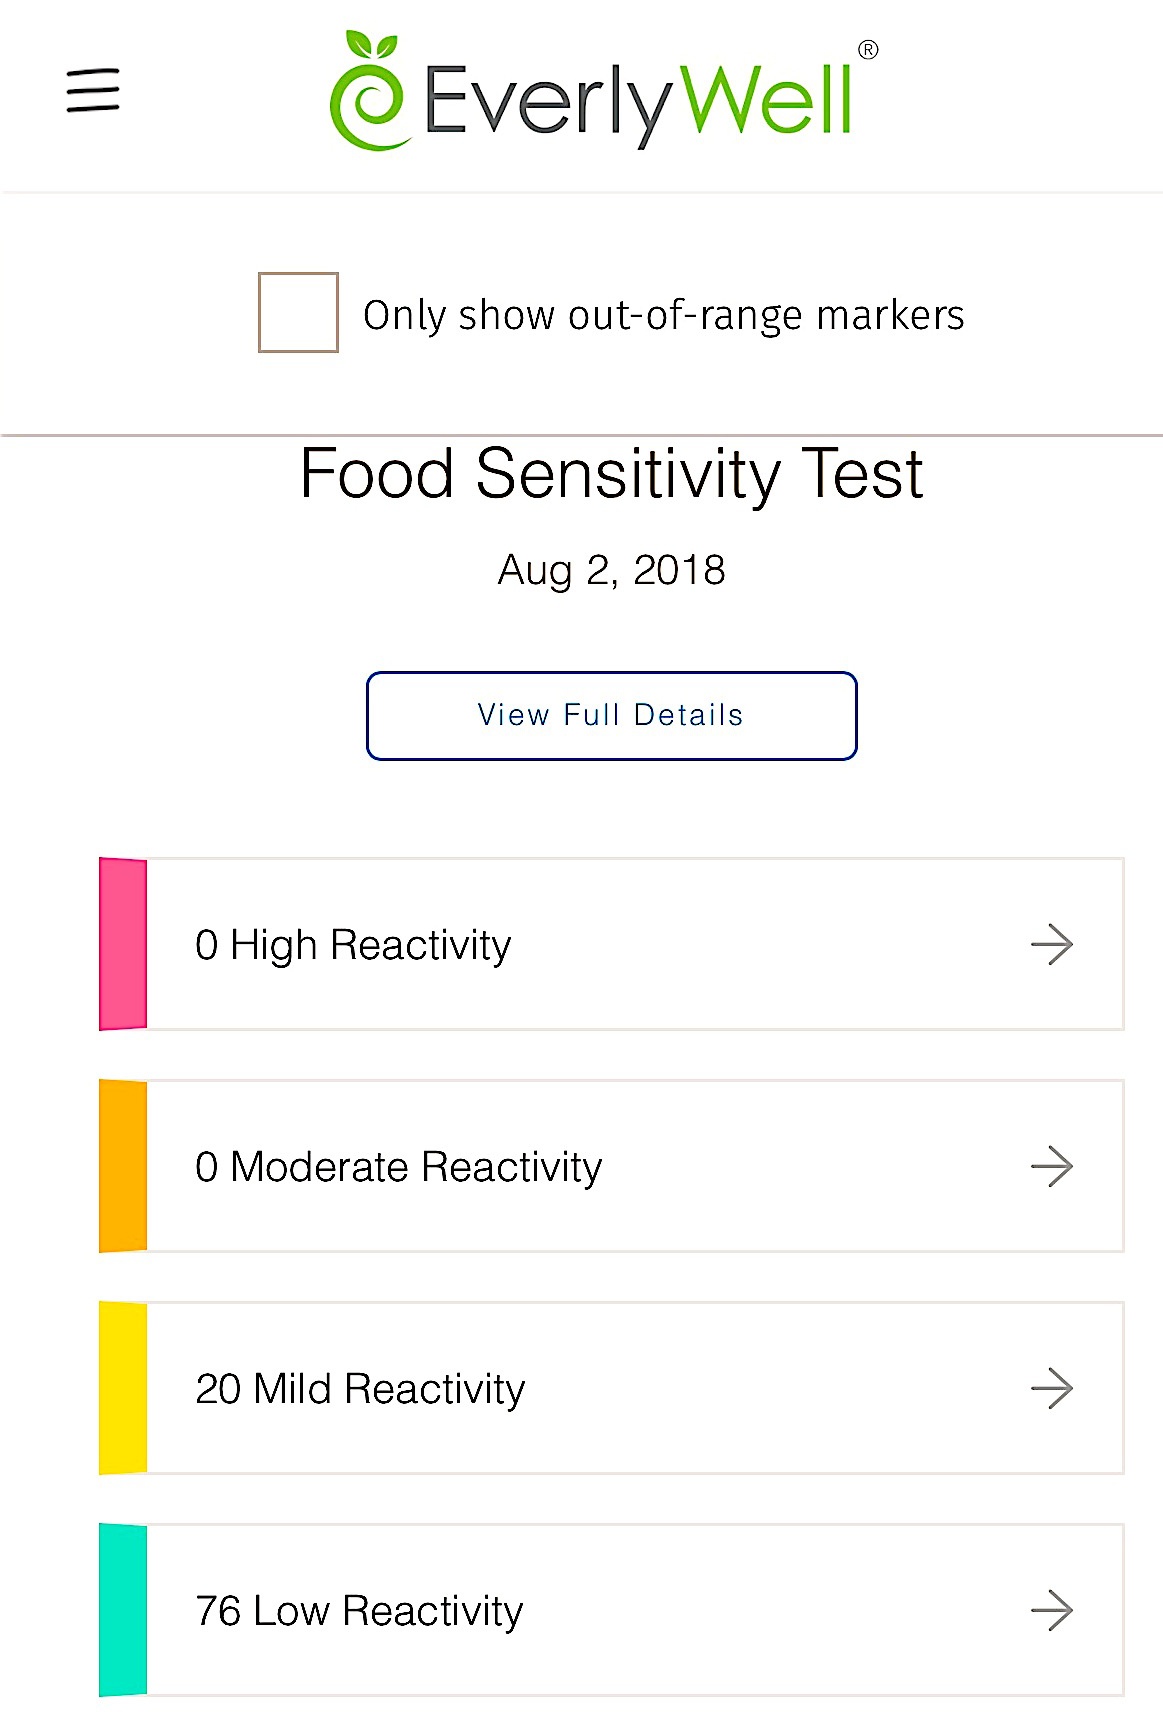 EverlyWell at home food sensitivity test